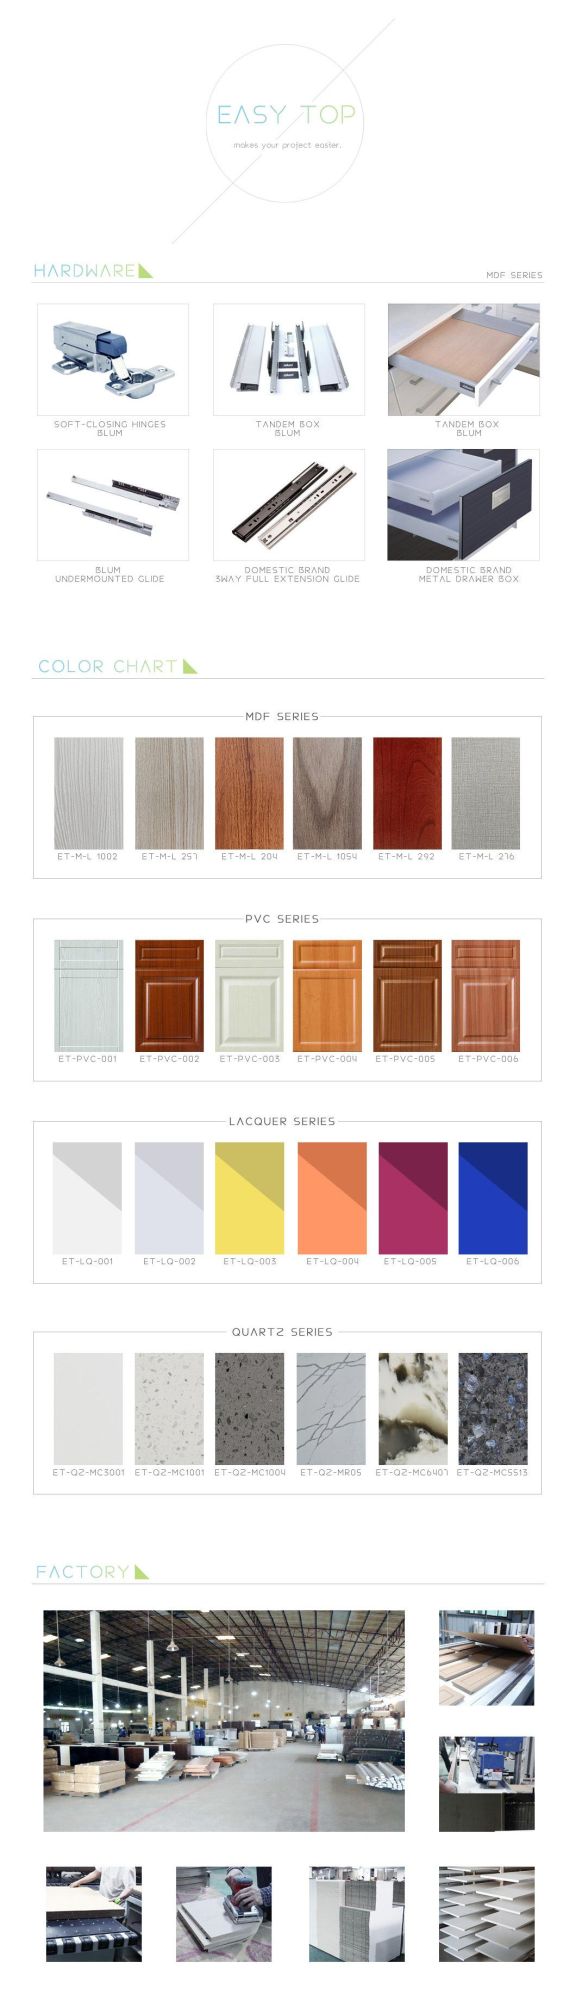 Kitchen Remodel L-Shaped Economical and Practical Flat Cupboard Design Tall Display Kitchen Drawer Cabinets Foshan